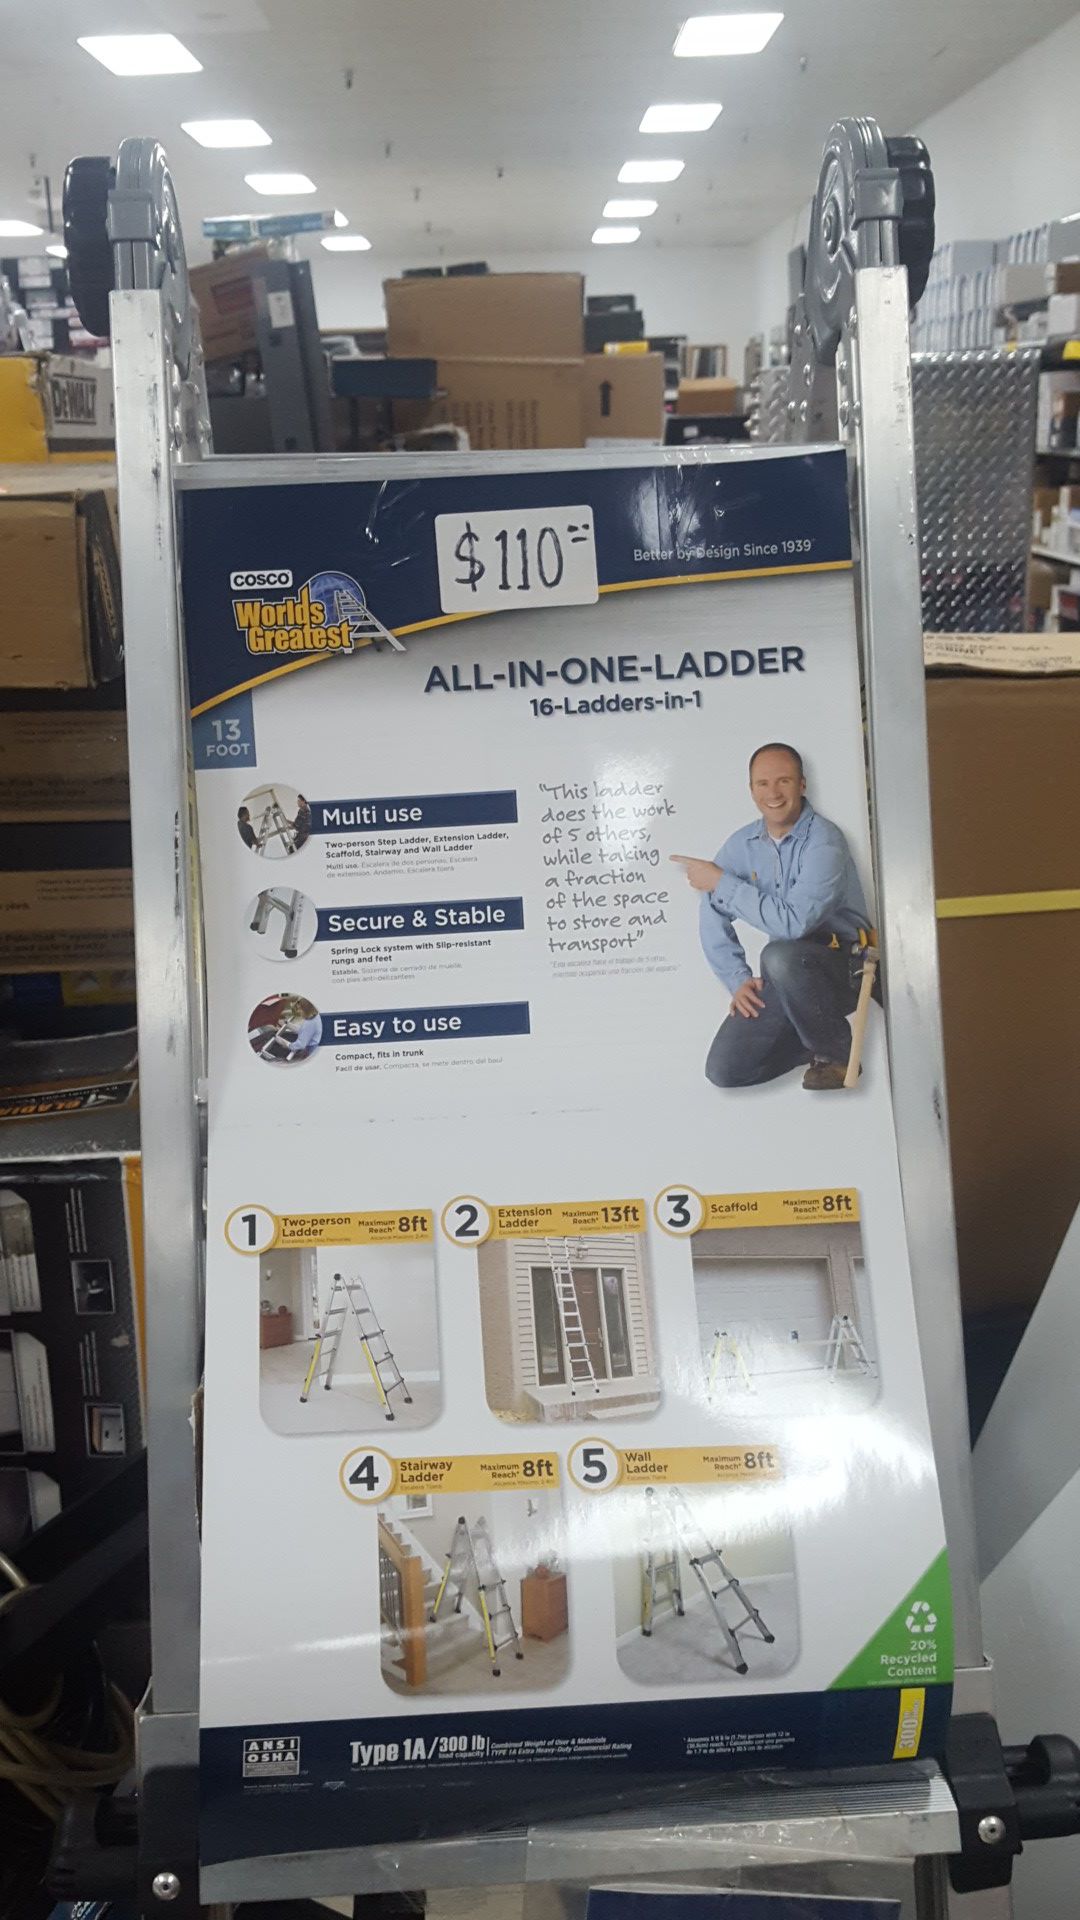 All in one ladder